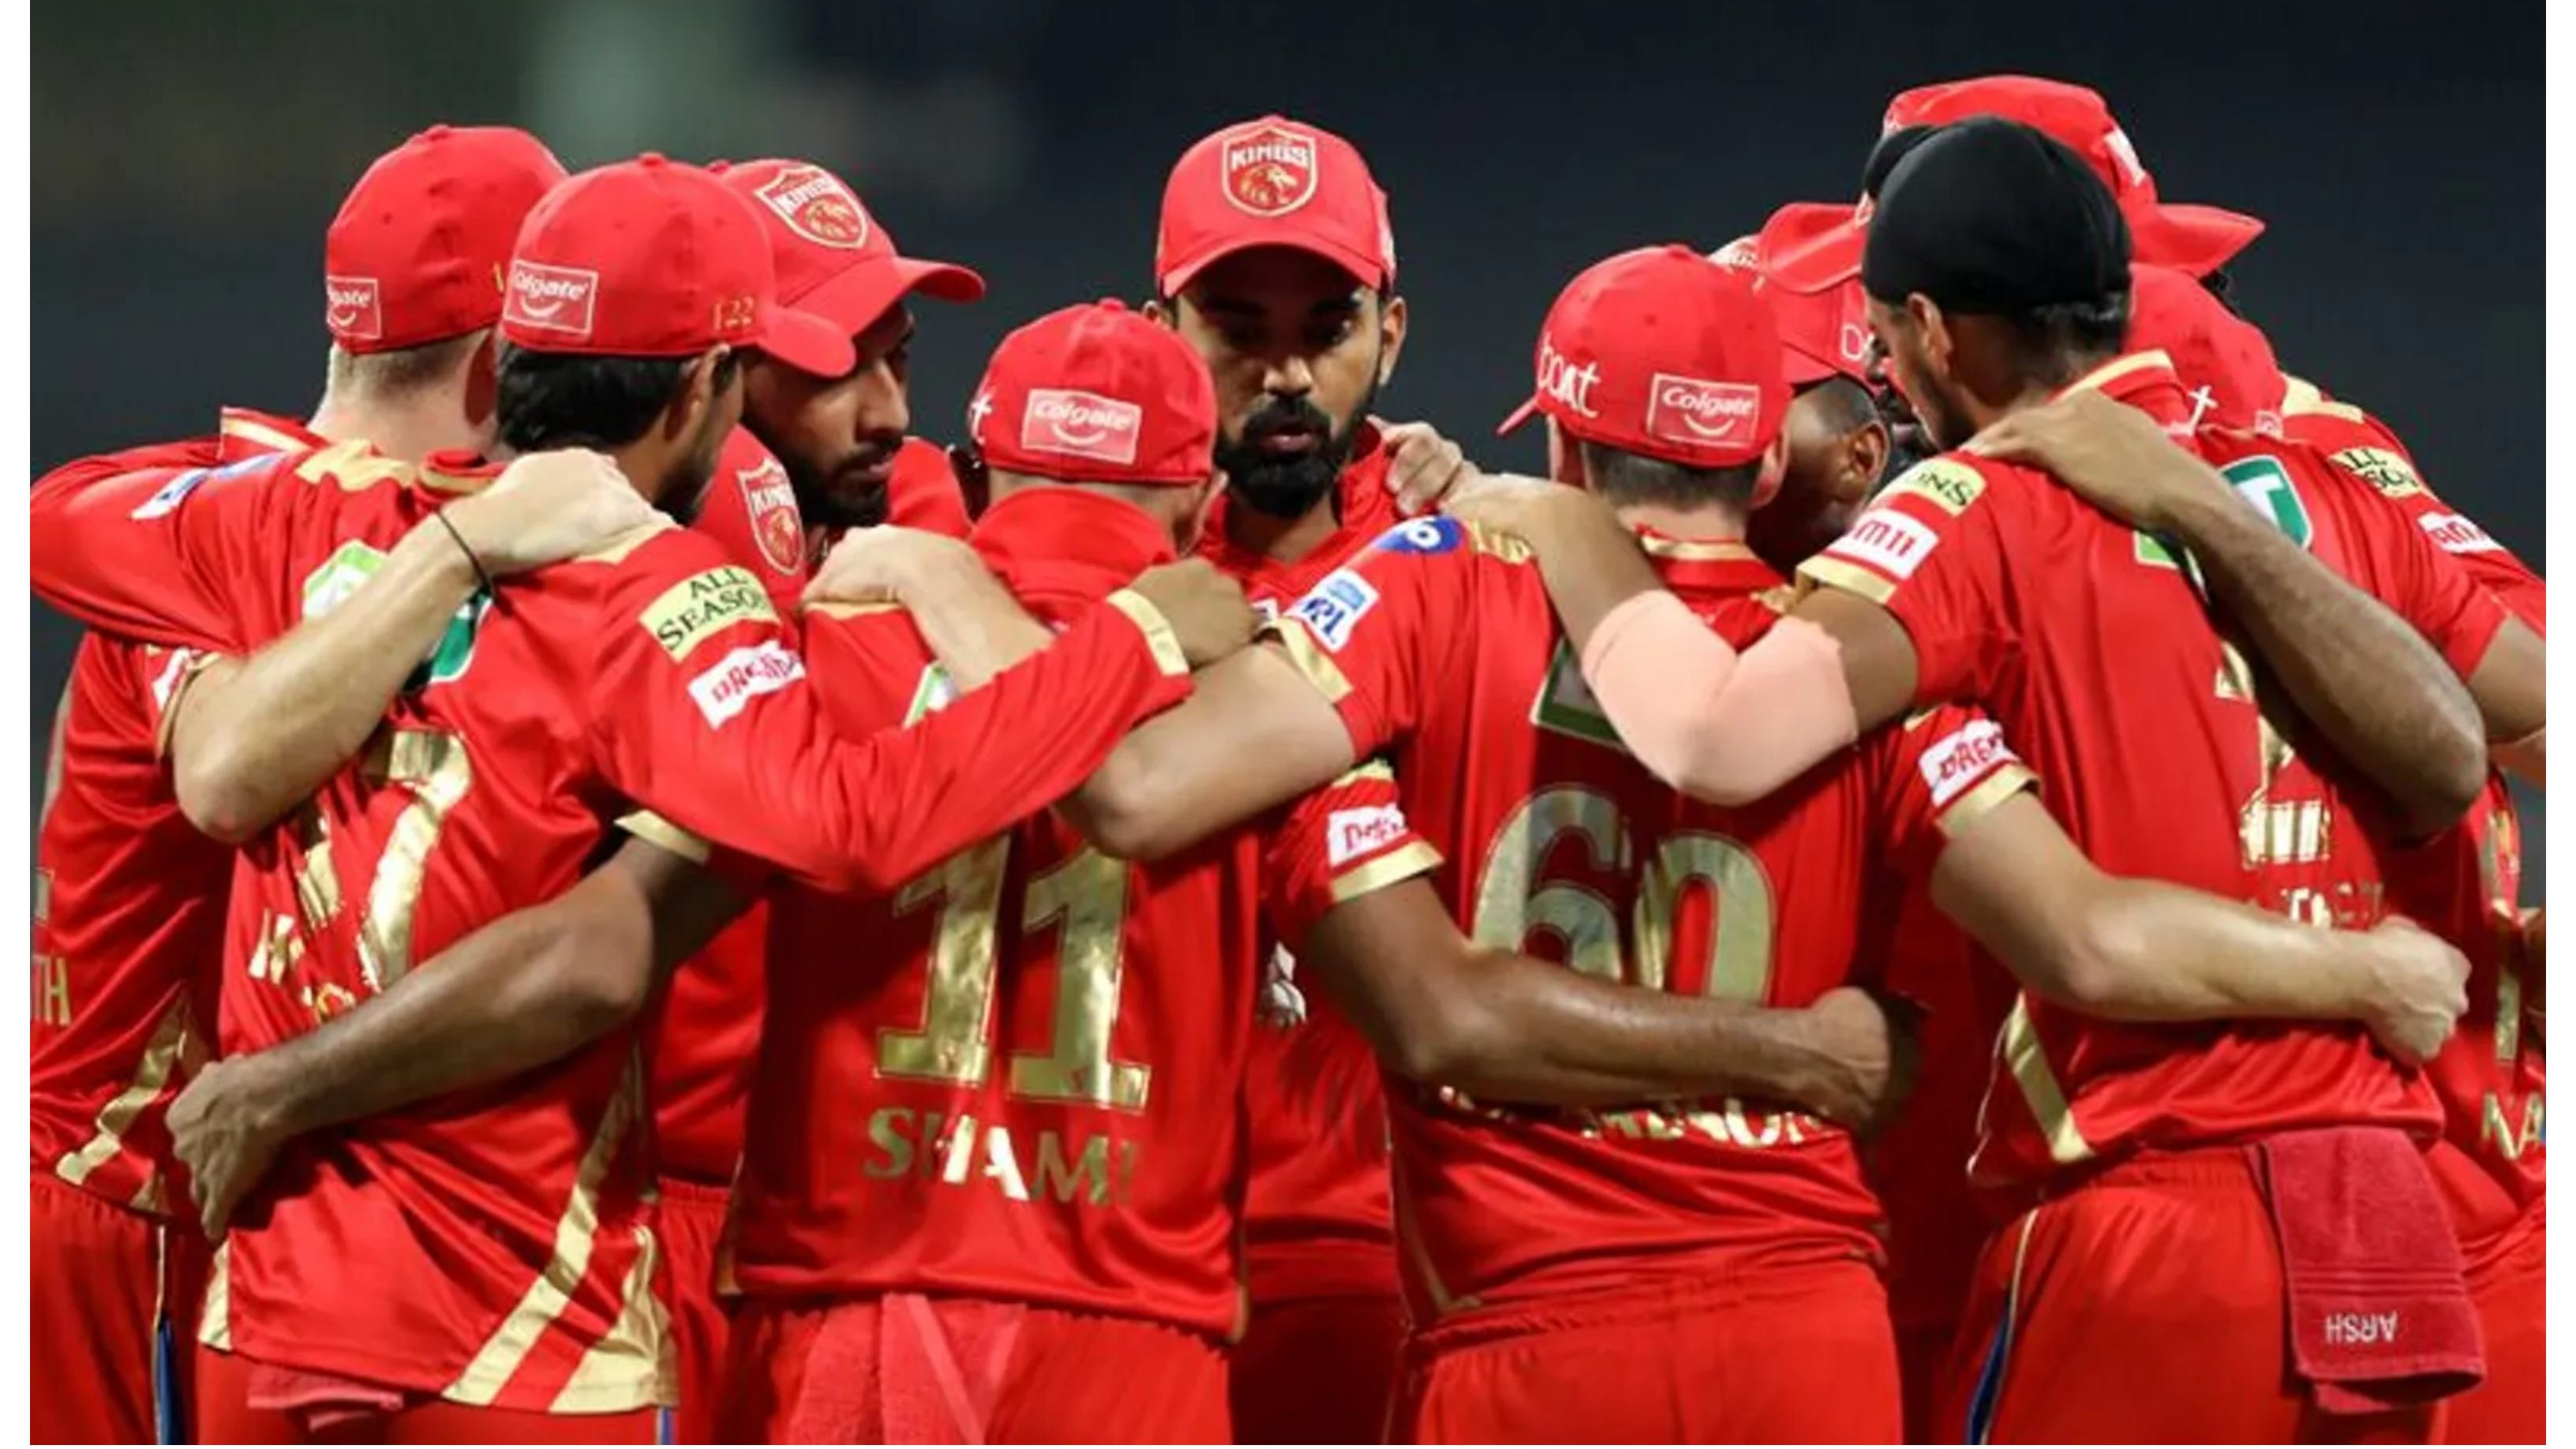 IPL 2021: “We still want to play fearless cricket”, says PBKS skipper KL Rahul after being outclassed by CSK 